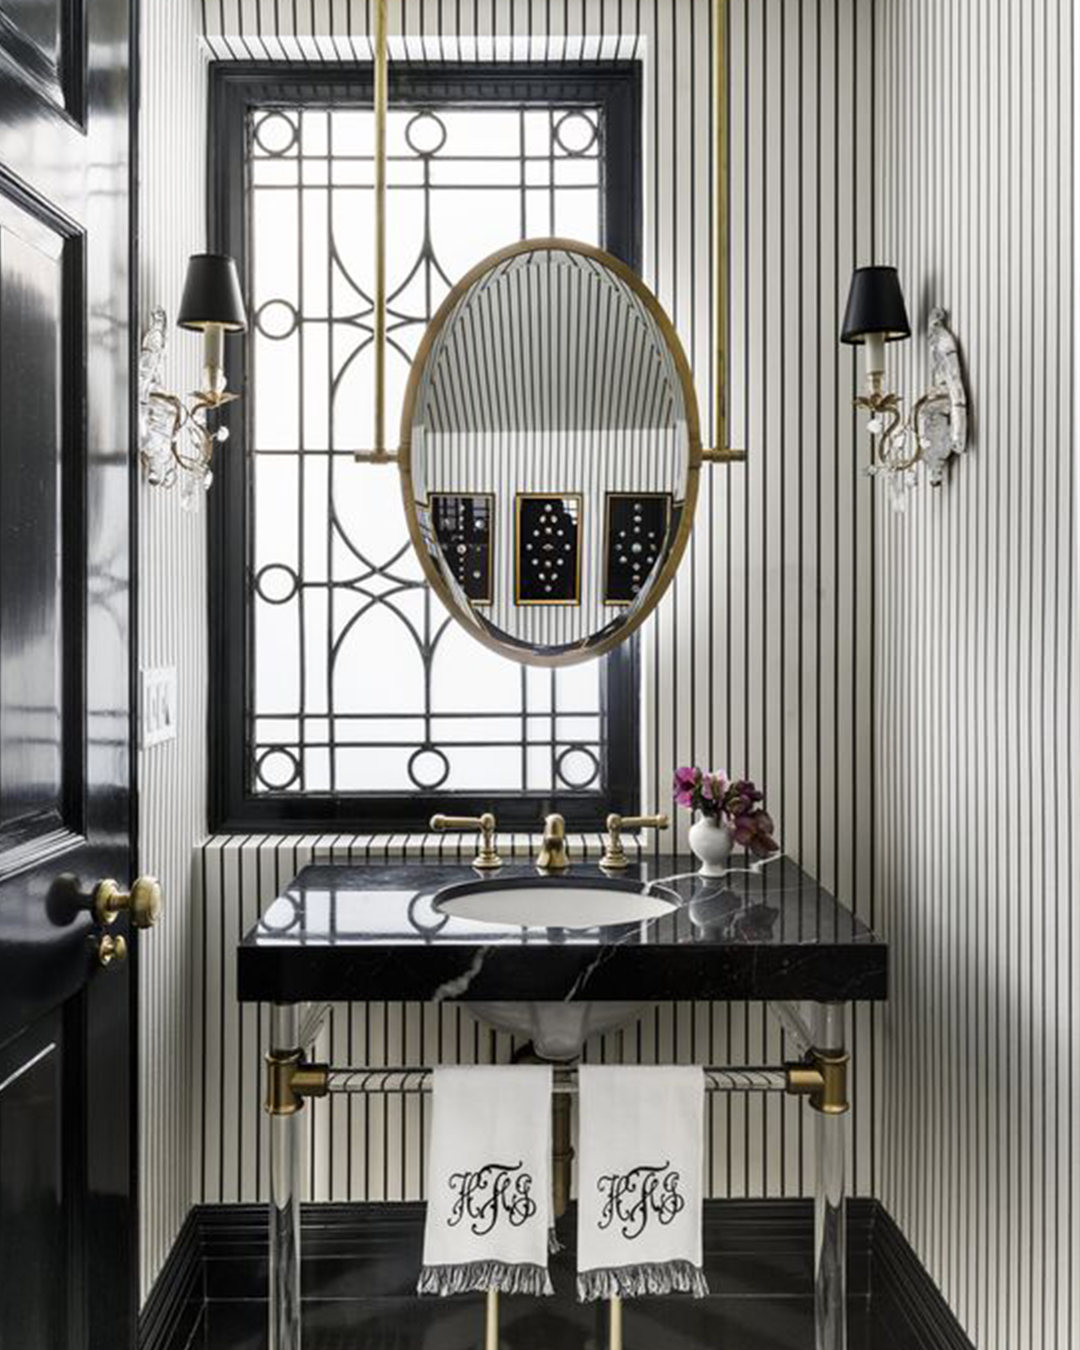 Grand Millenial style bathroom with gold oval mirror, striped wallpaper and black accents